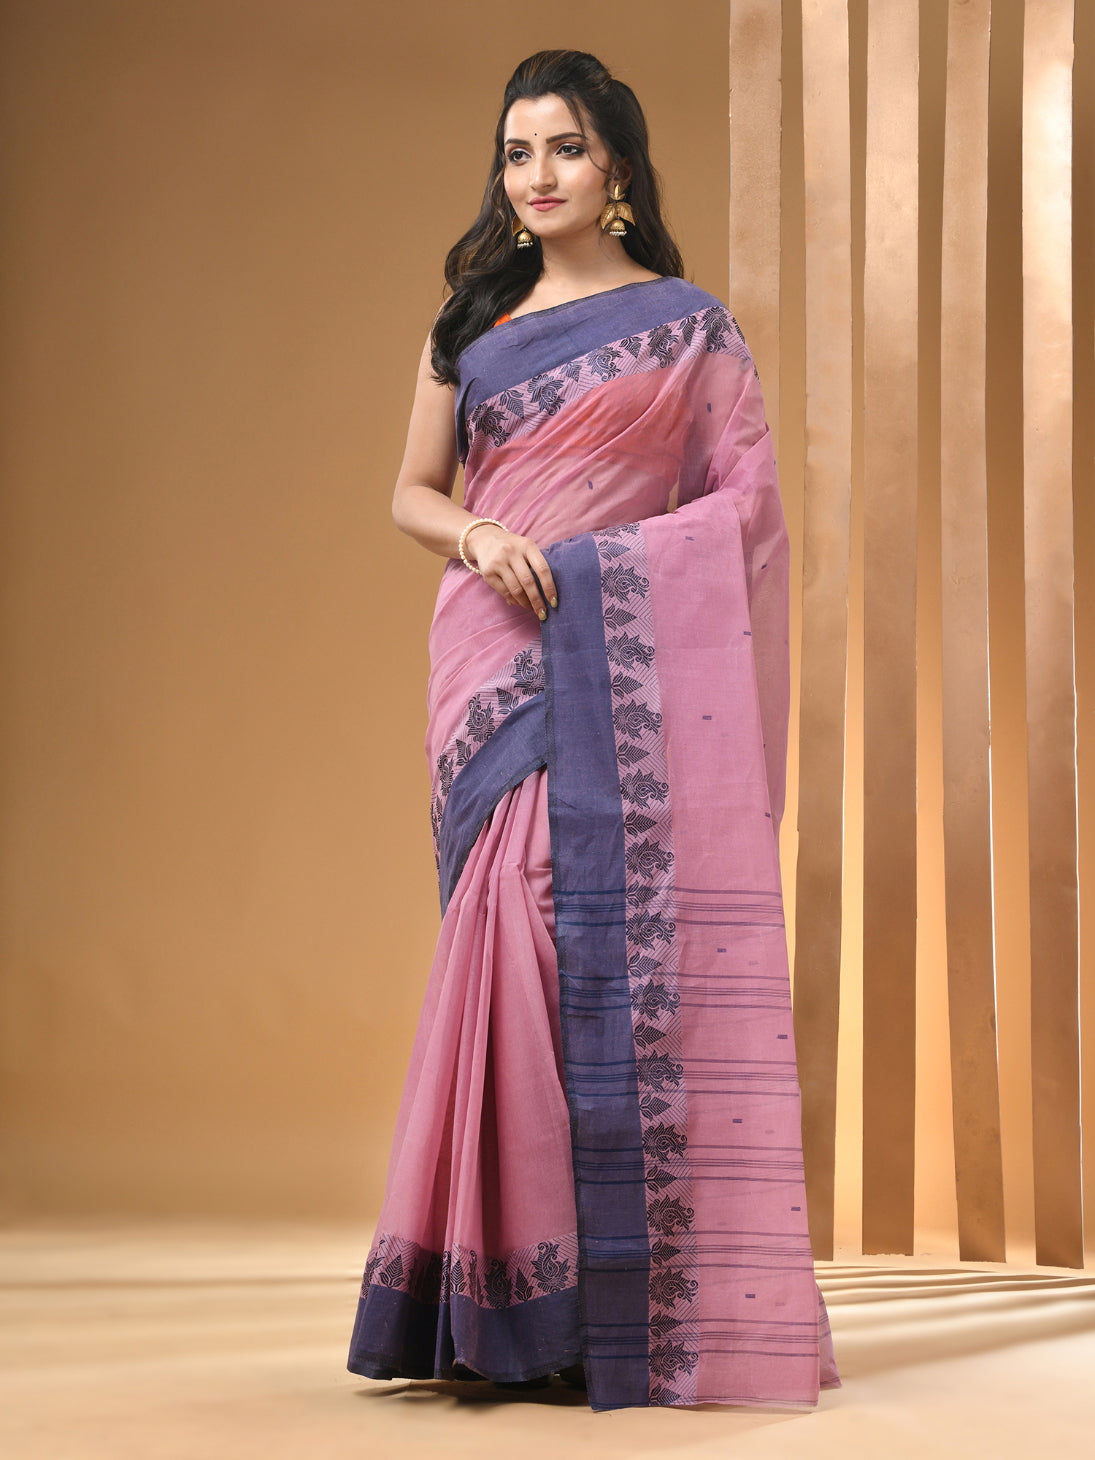 Lemonade Pink Pure Cotton Tant Saree With Woven Designs